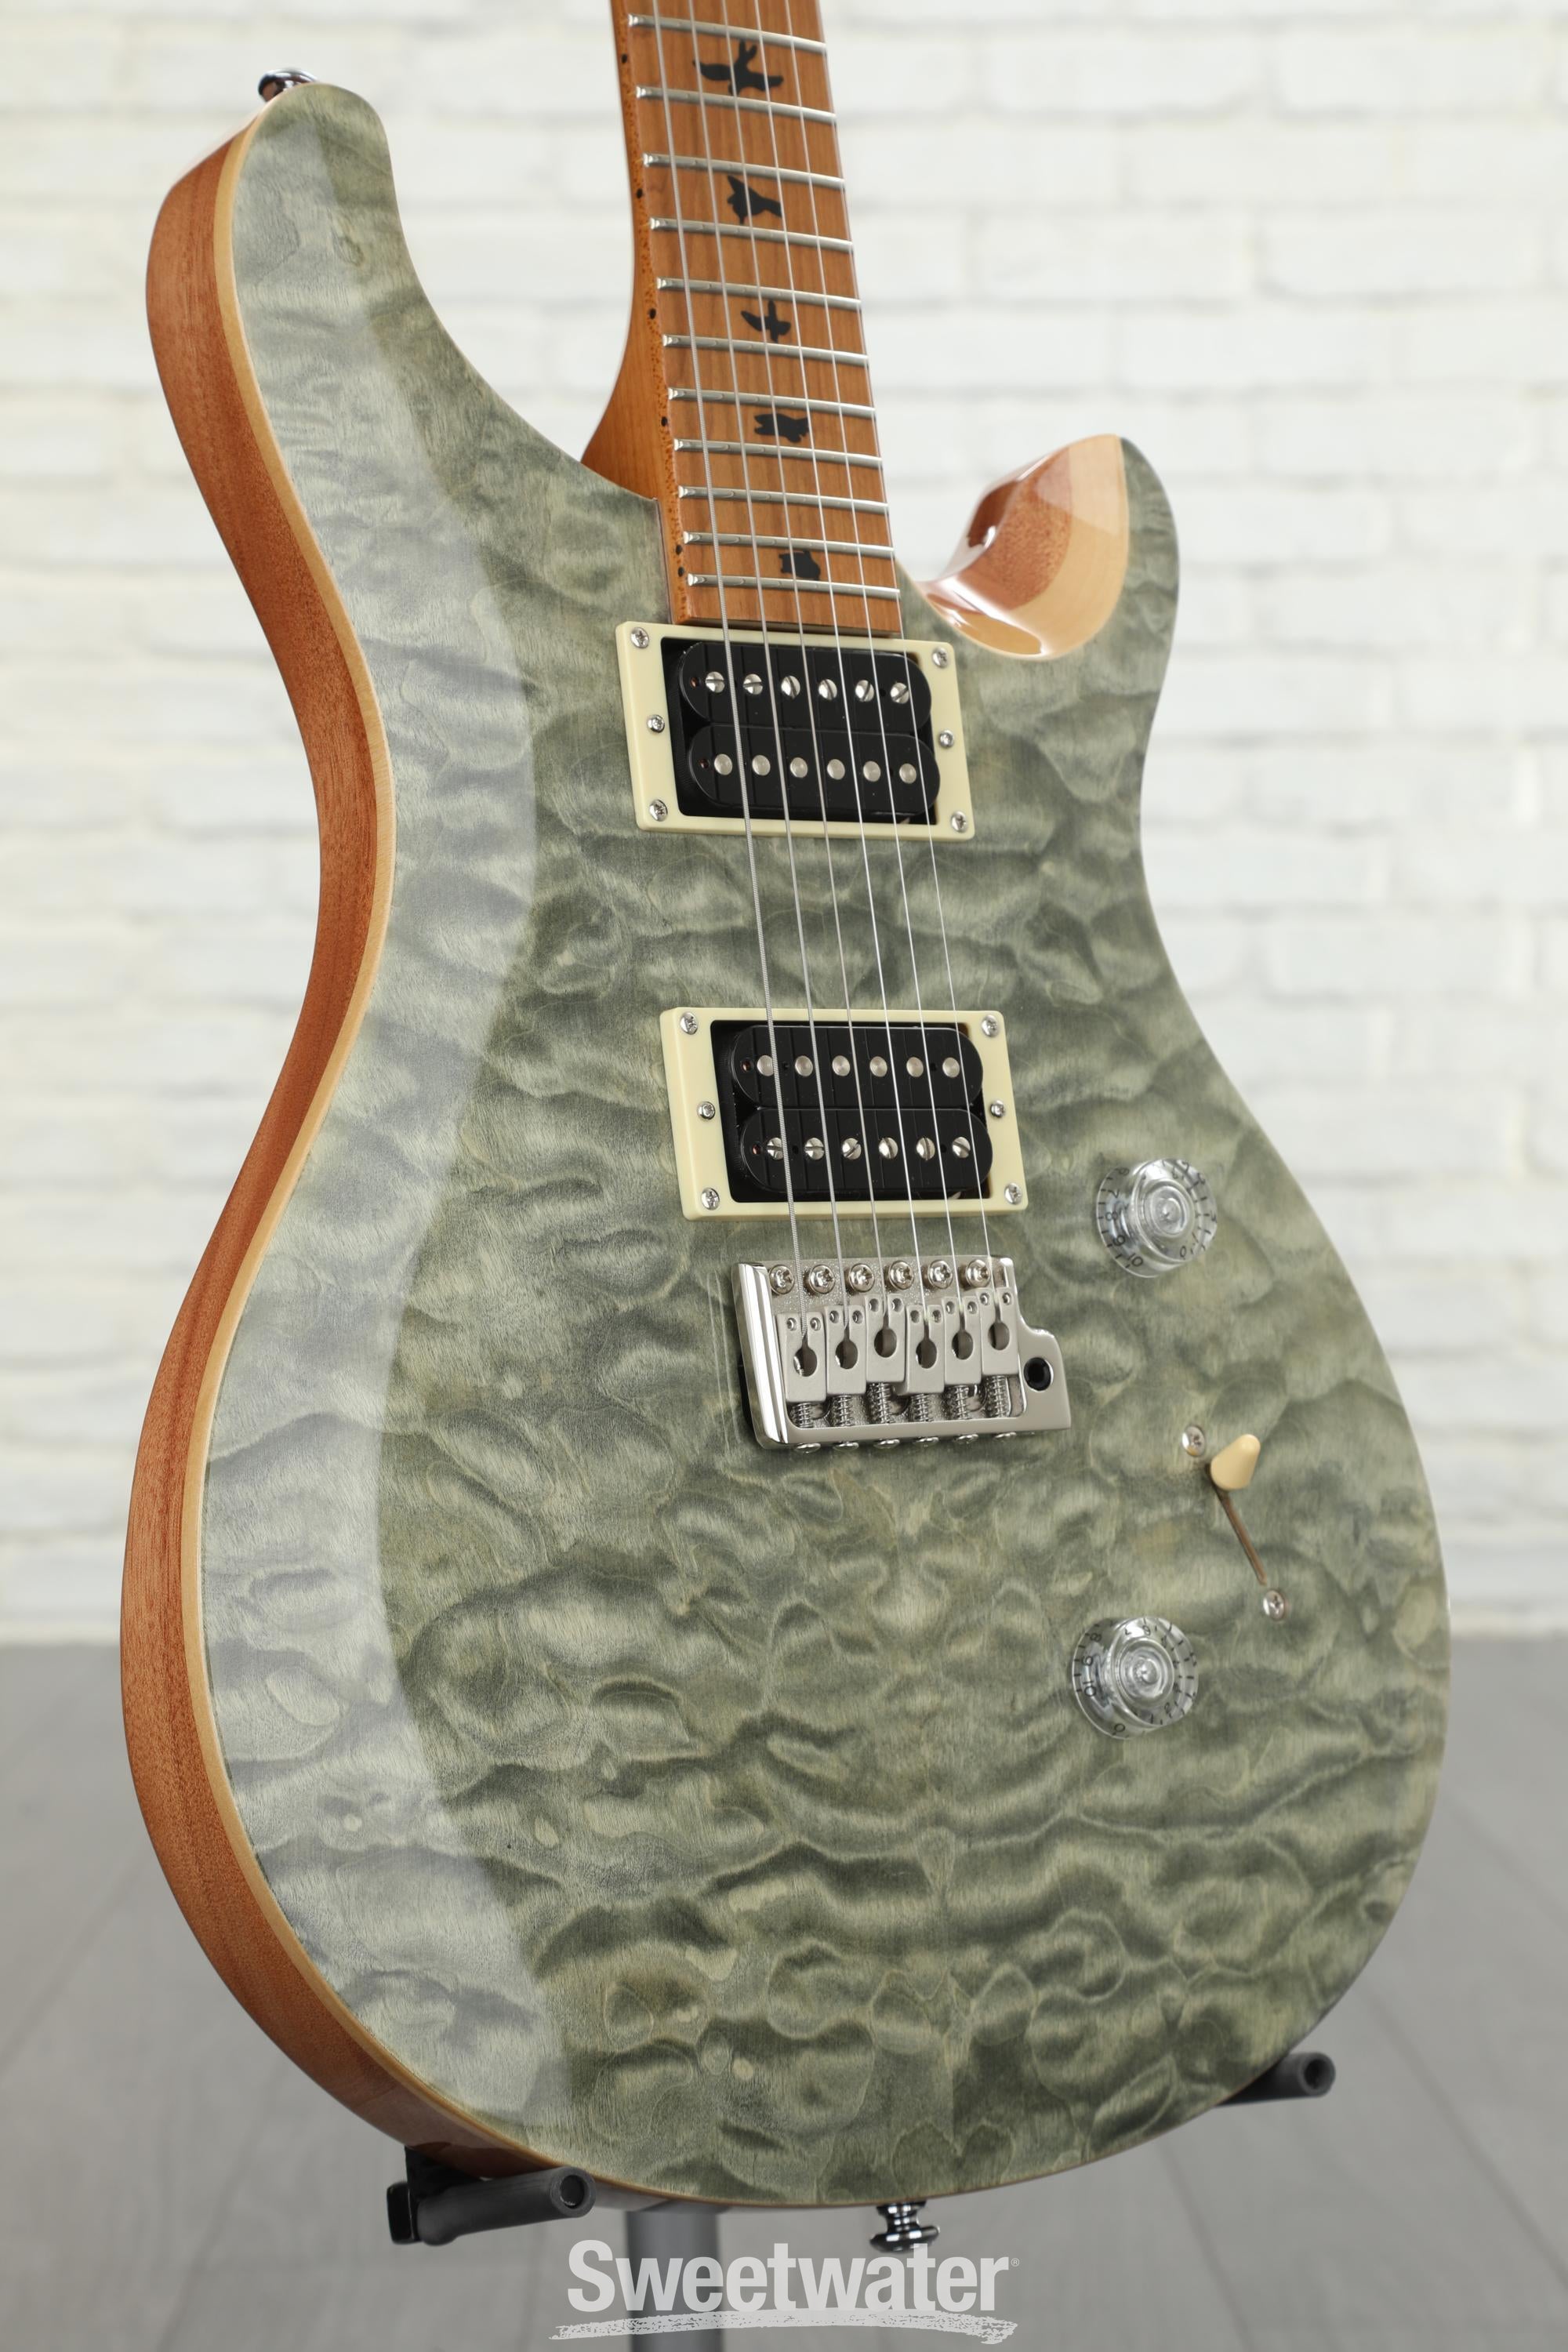 PRS SE Custom 24 Limited Edition - Trampas Green with Roasted 